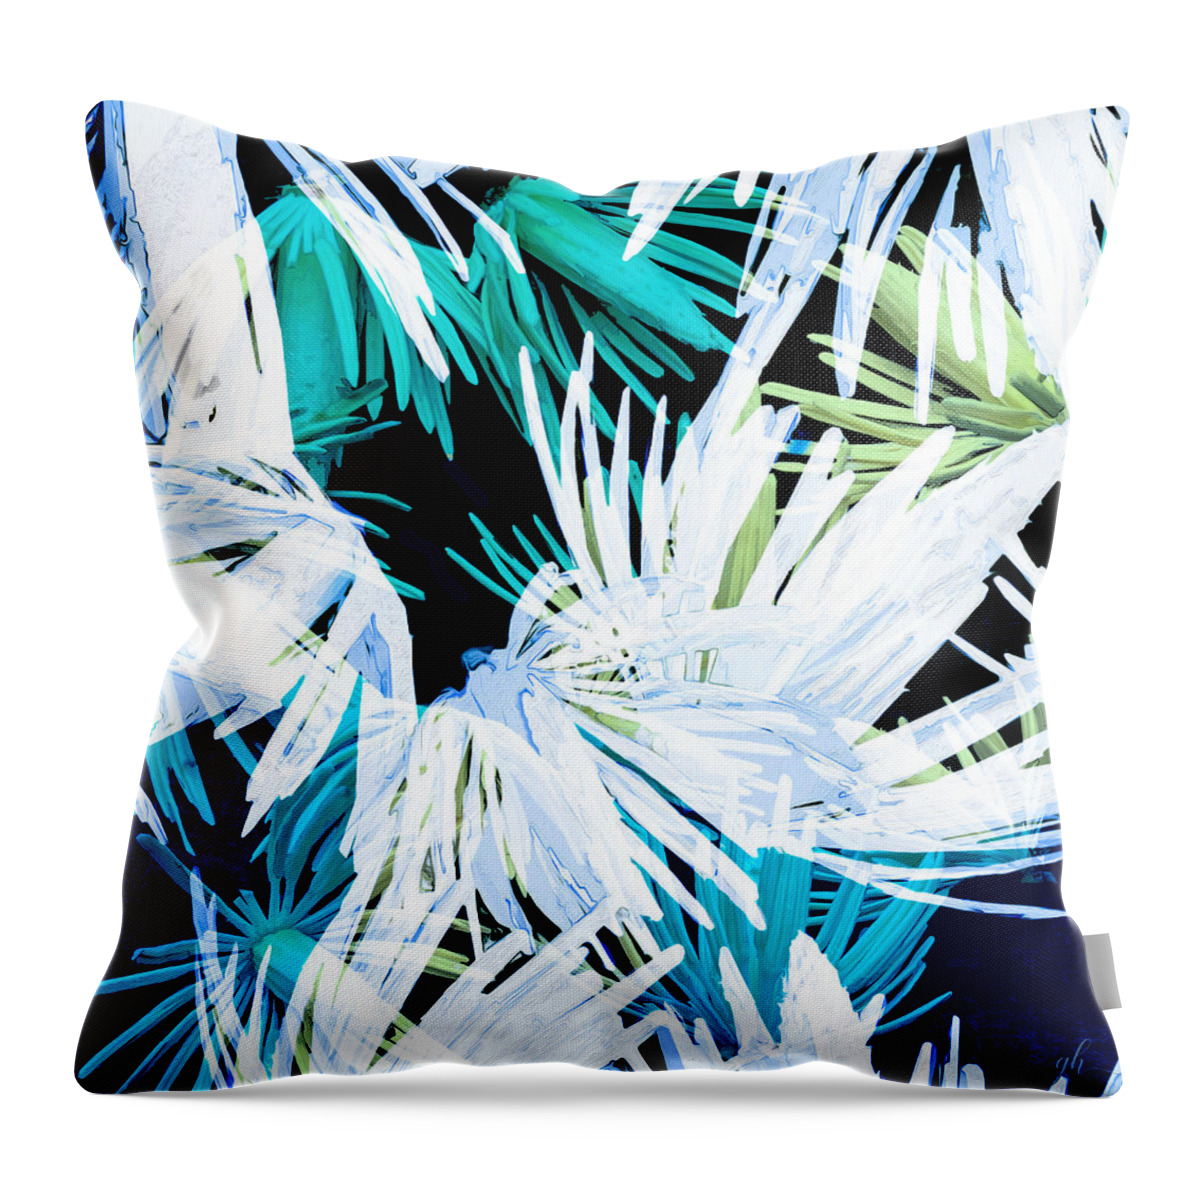 Botanical Abstract Throw Pillow featuring the digital art Tassels Tossed by Gina Harrison